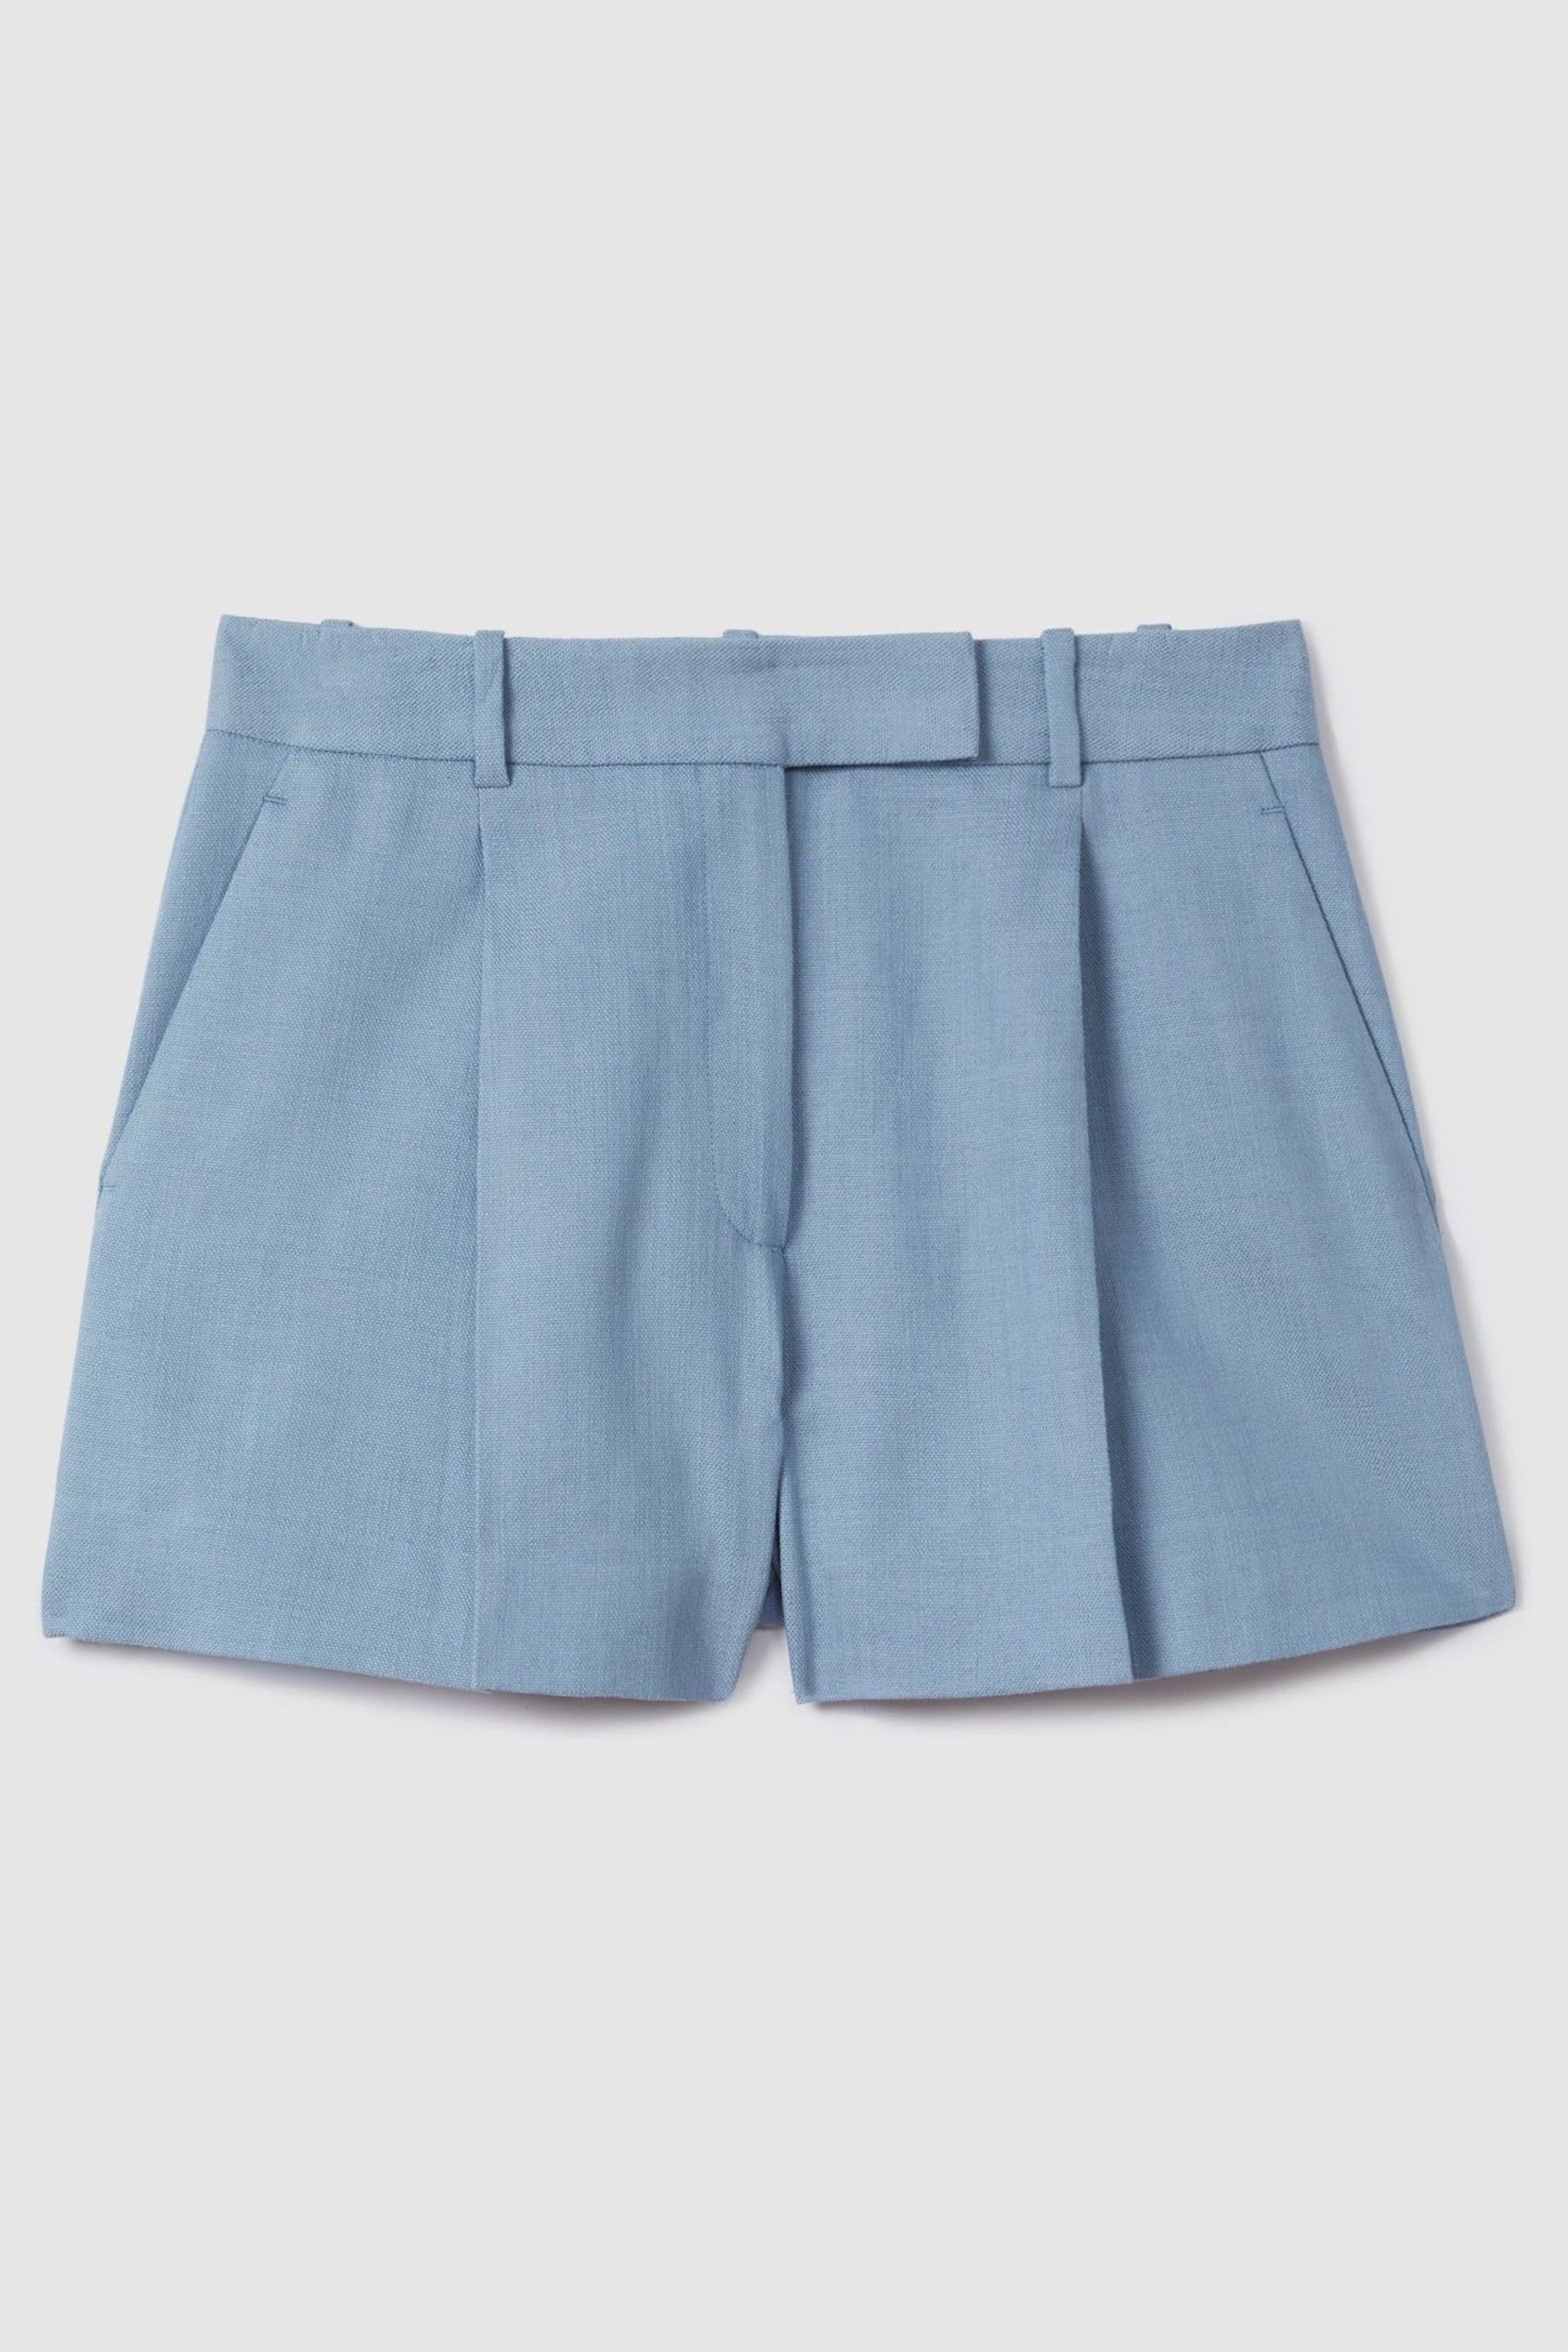 Reiss Blue June Tailored Suit Shorts with TENCEL™ Fibers - Image 2 of 6